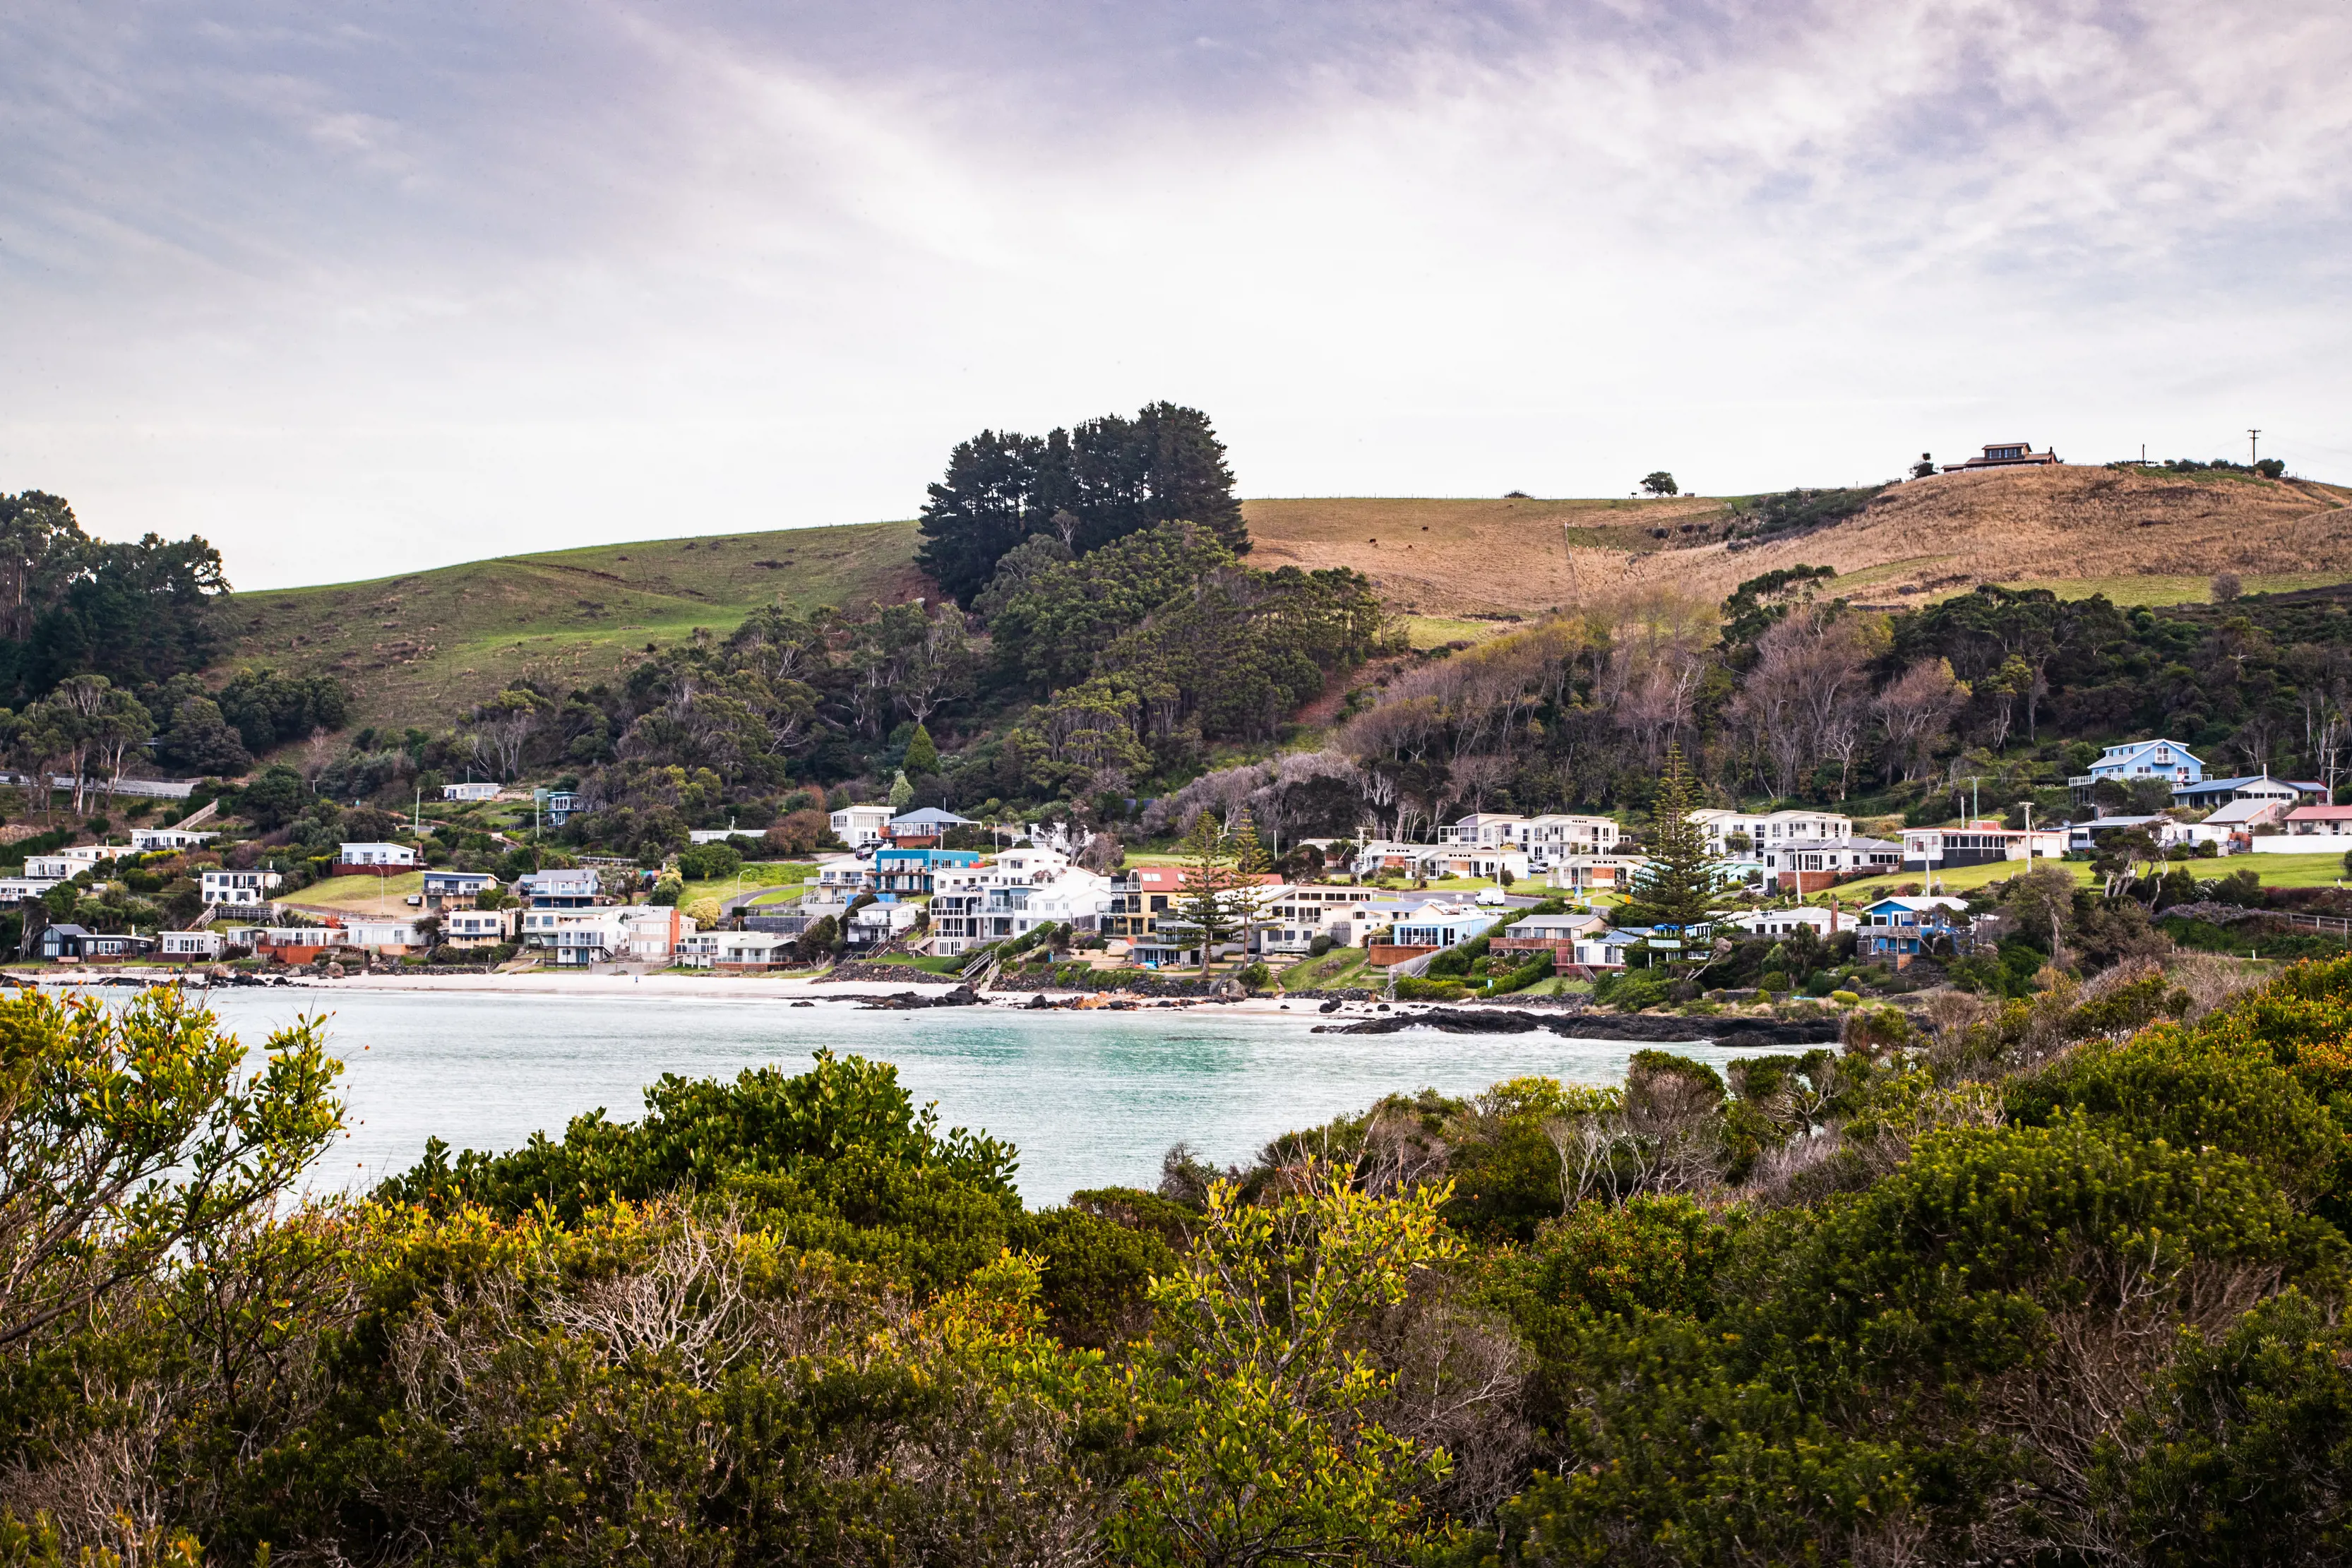 Bushes fill the foreground of the image with the ocean and houses of Boat Harbour surround the centre of the image. Valleys fill the background of the image.